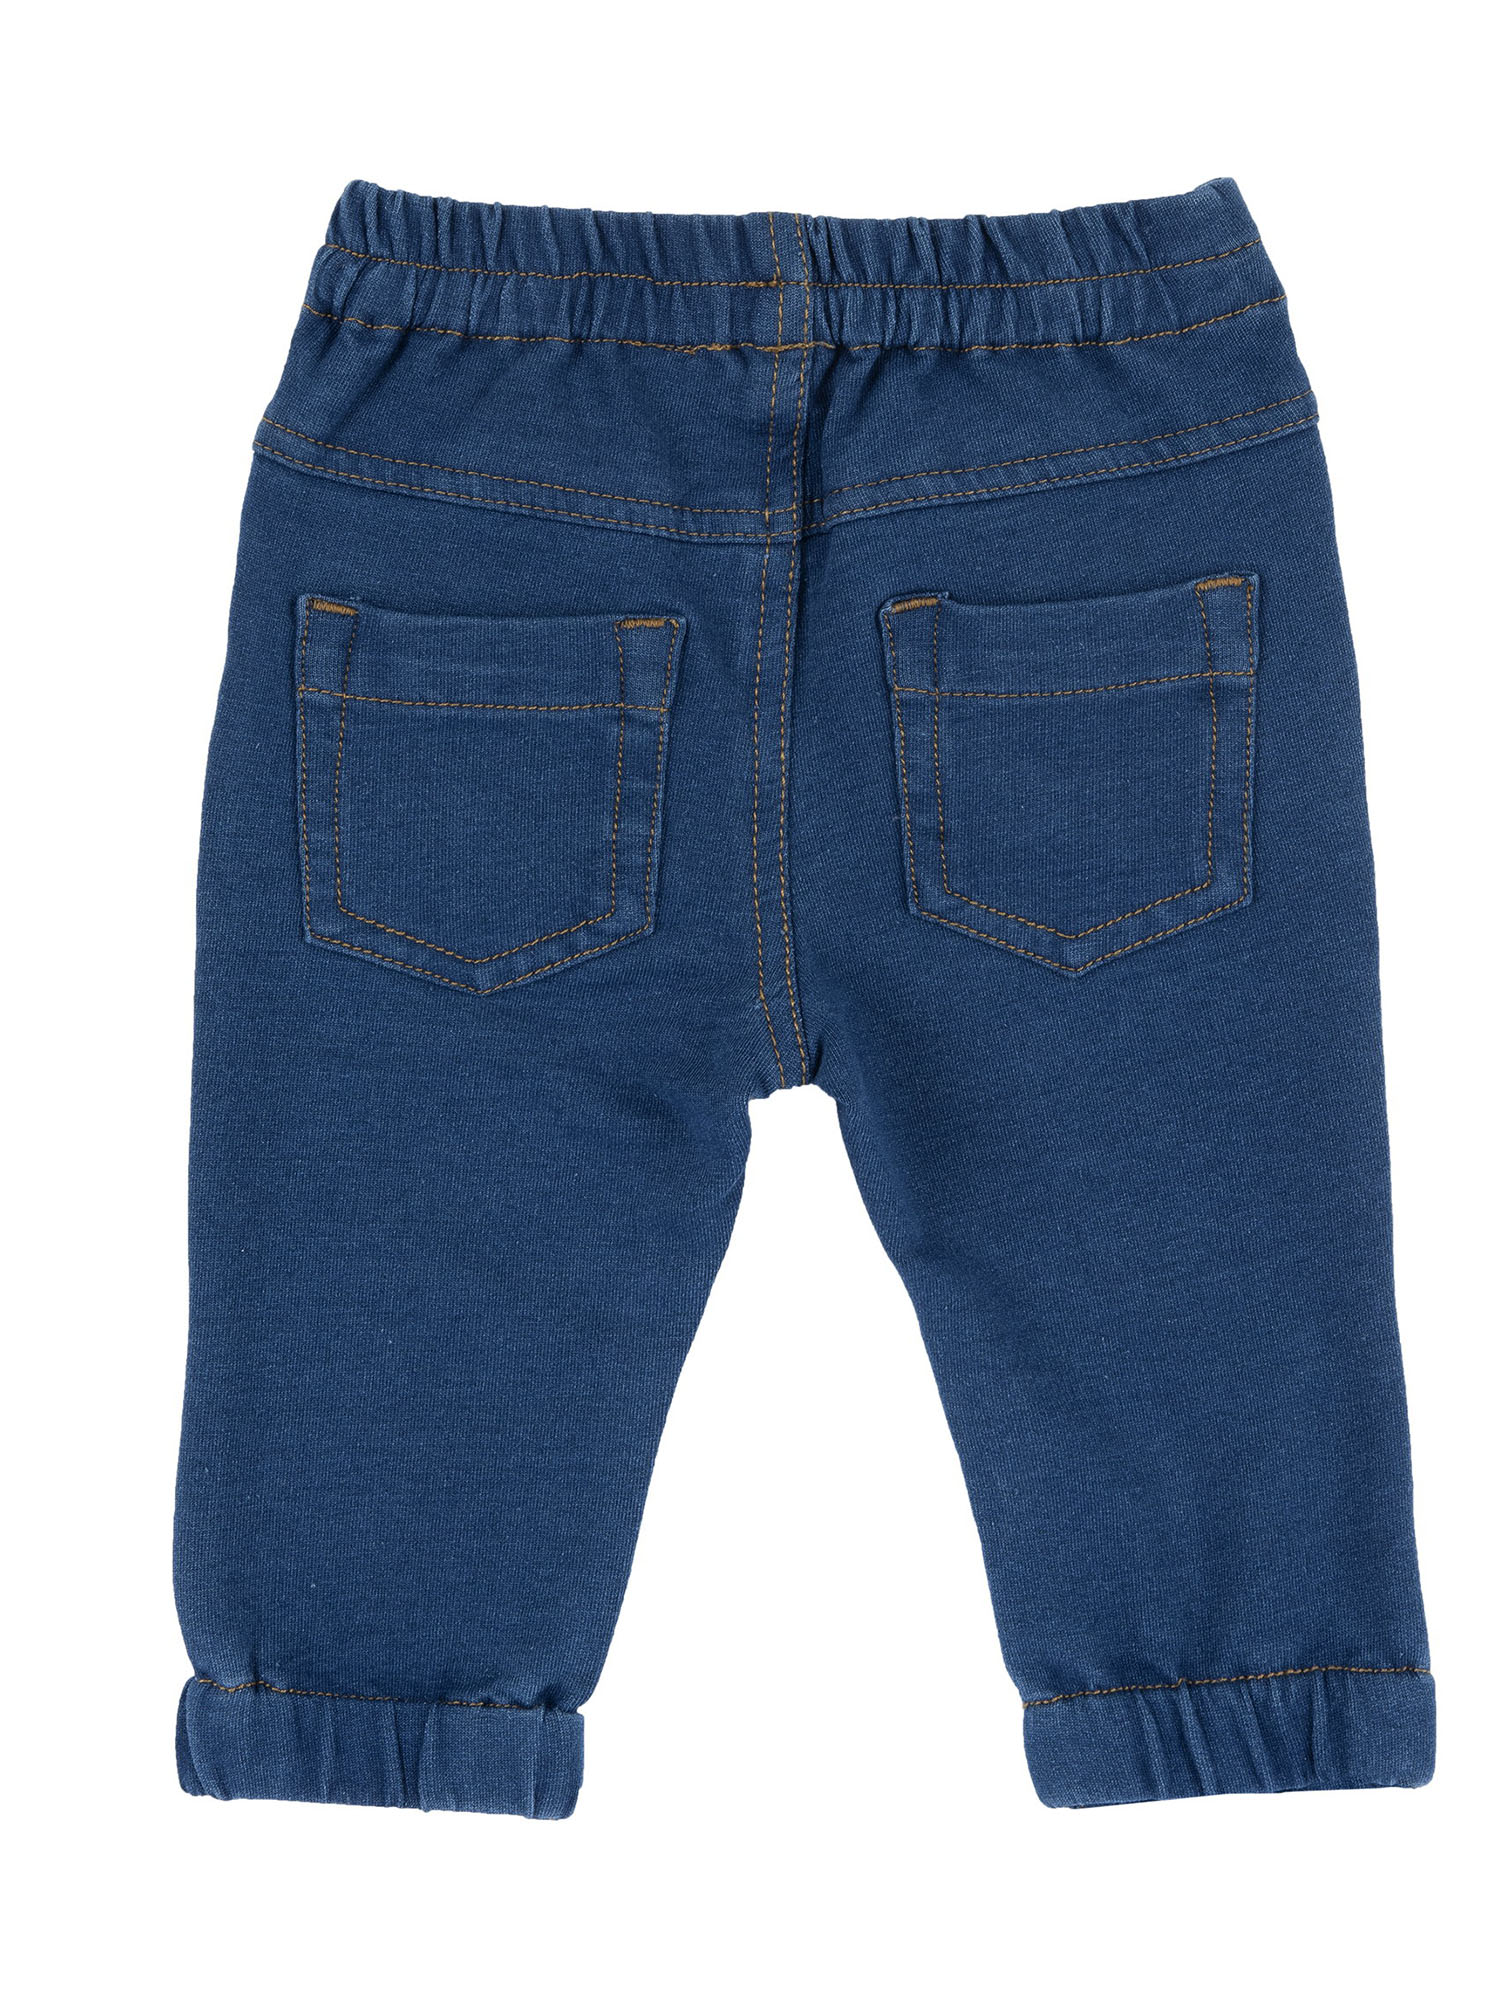 CHICCO JEANS - JEANS